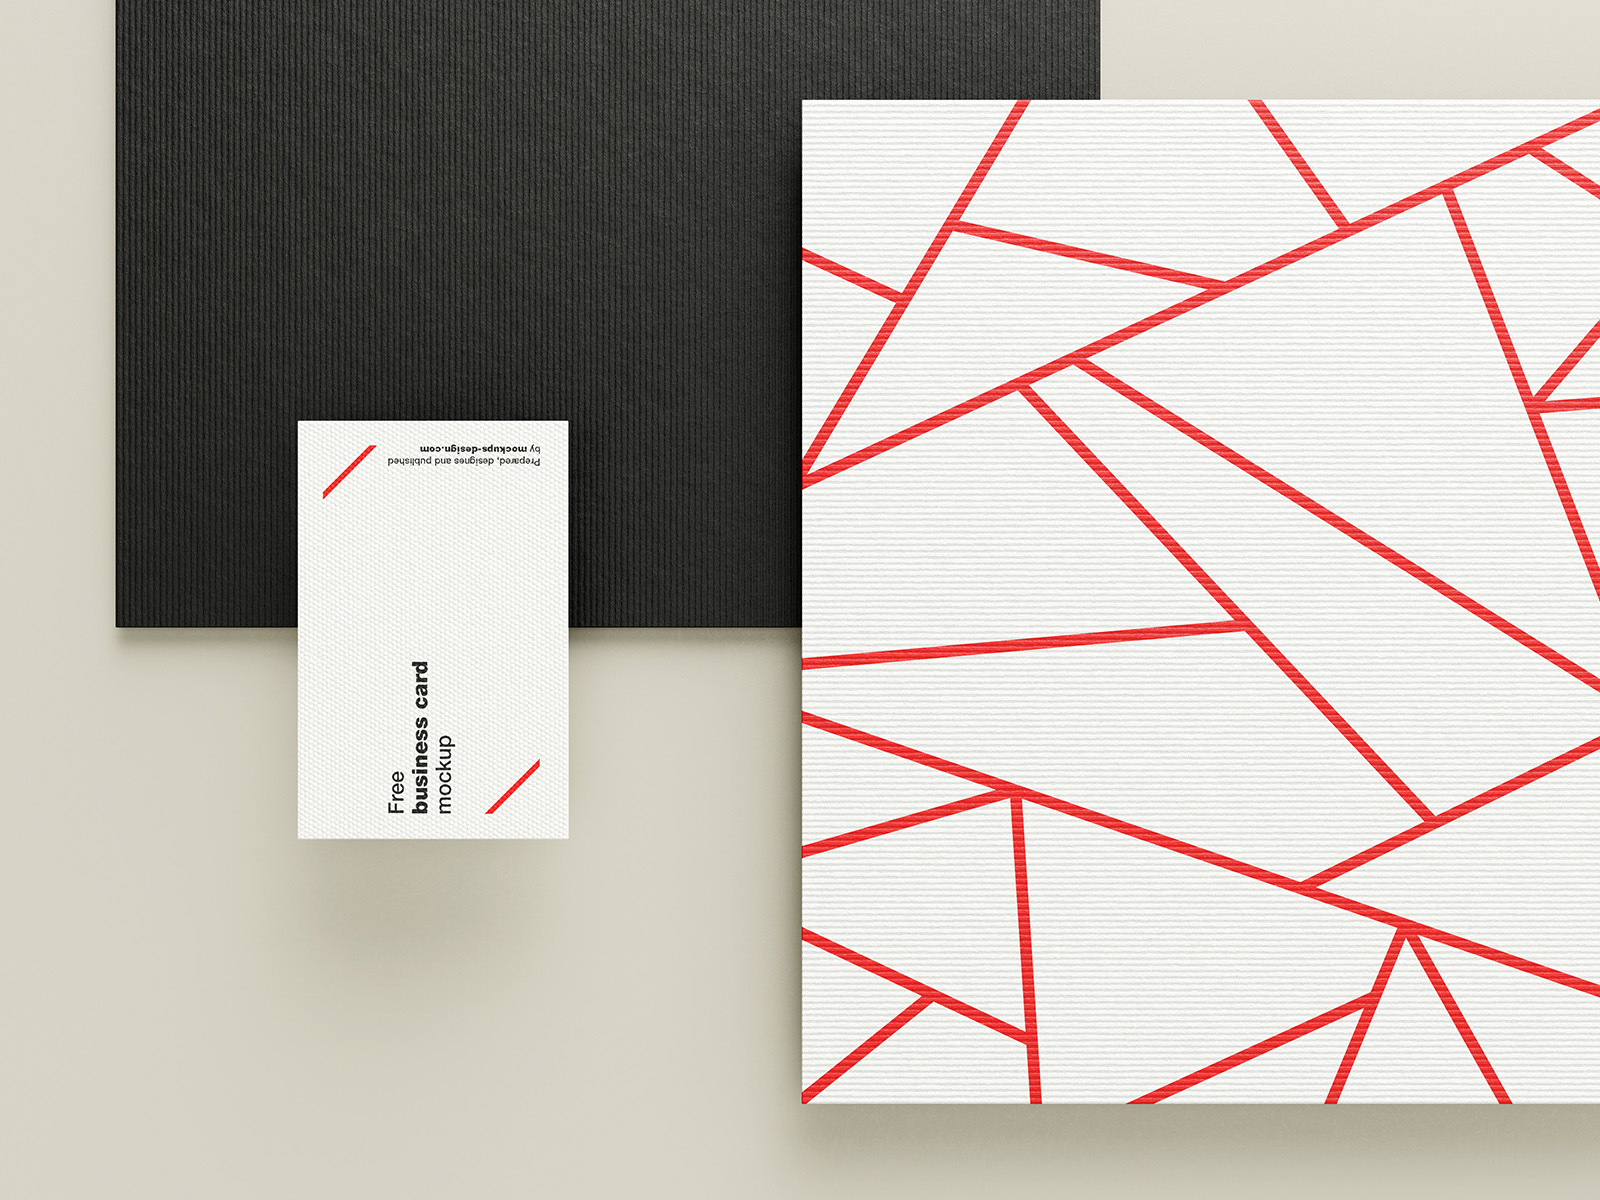 Stationery with textured papers mockup